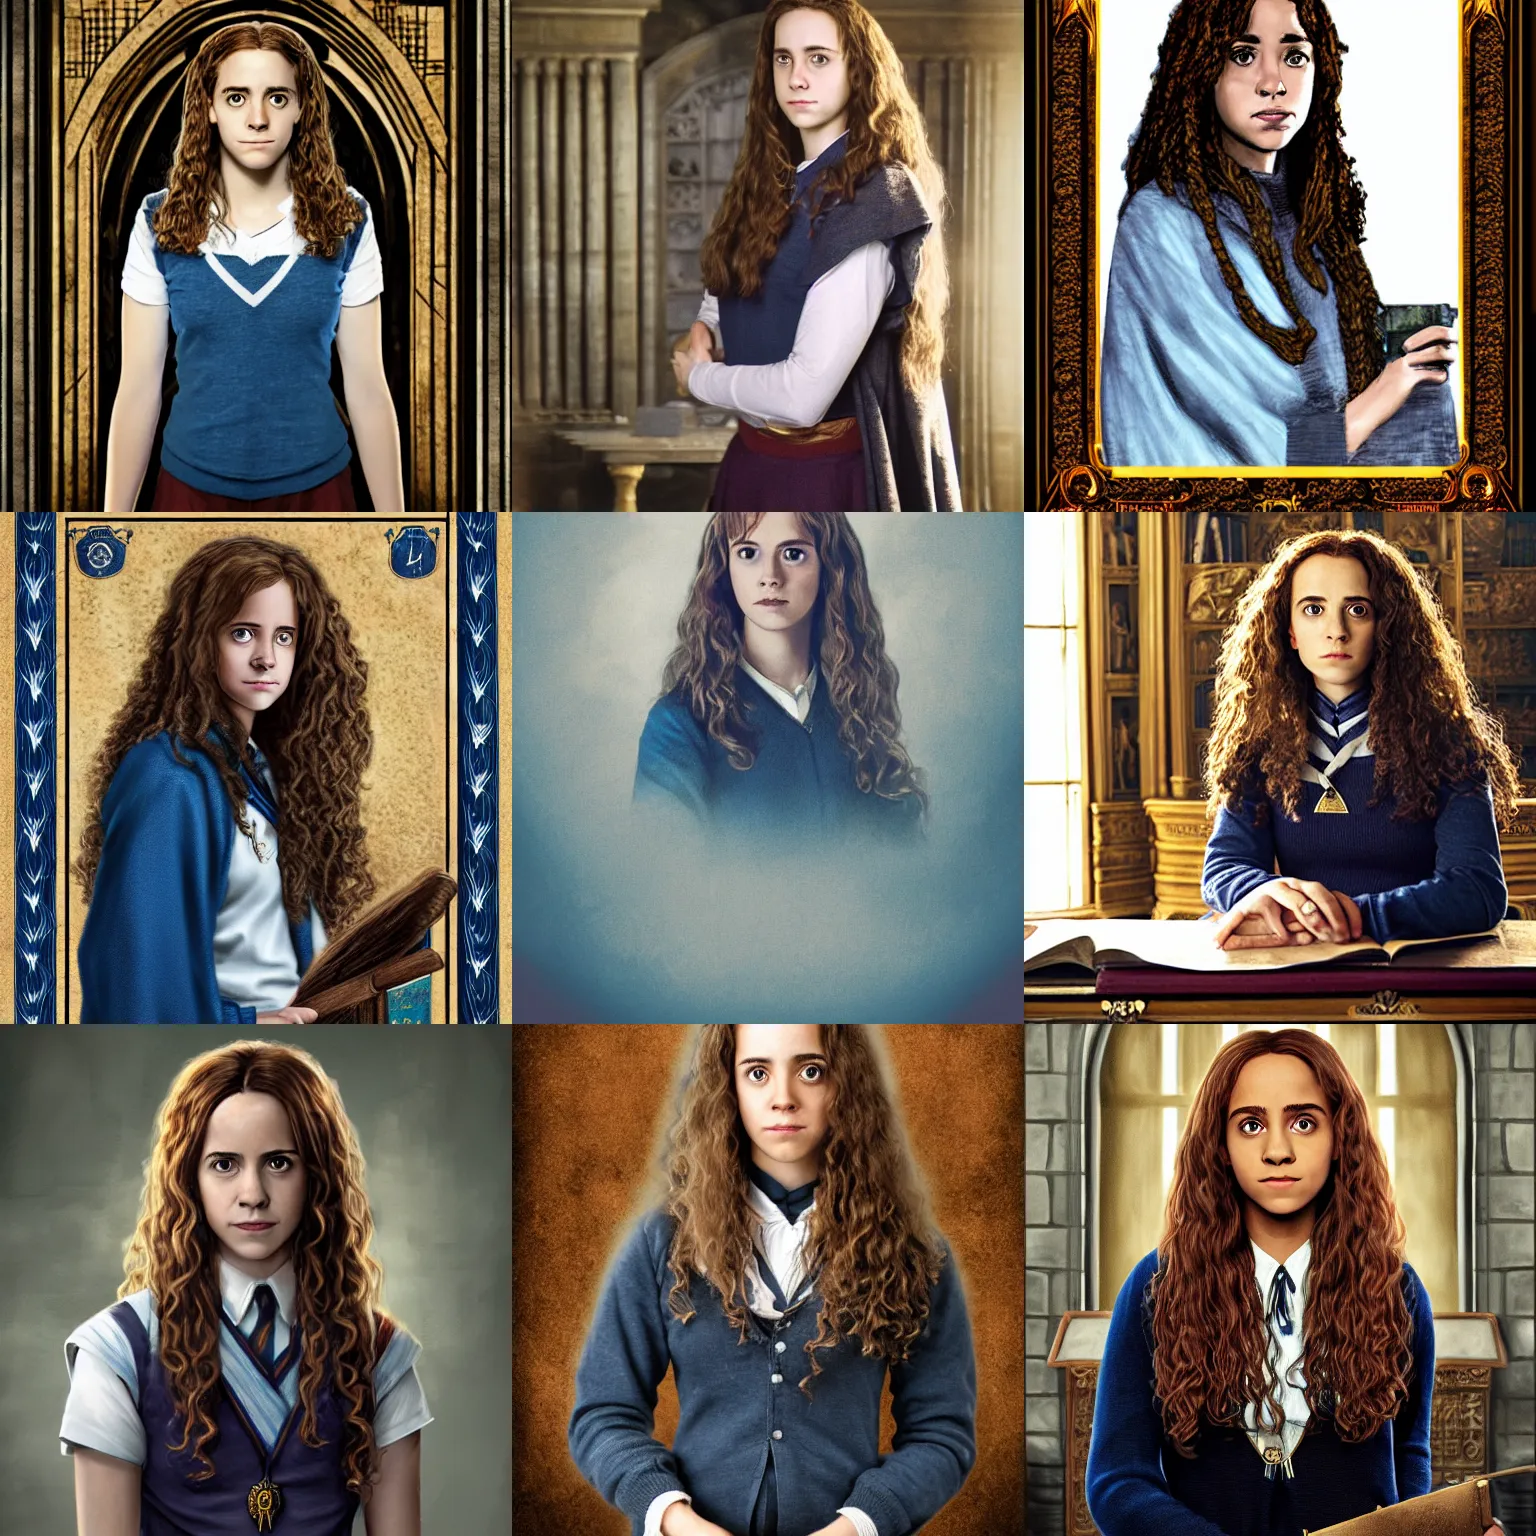 Prompt: A portrait photo of Hermione Granger in the Ravenclaw common room